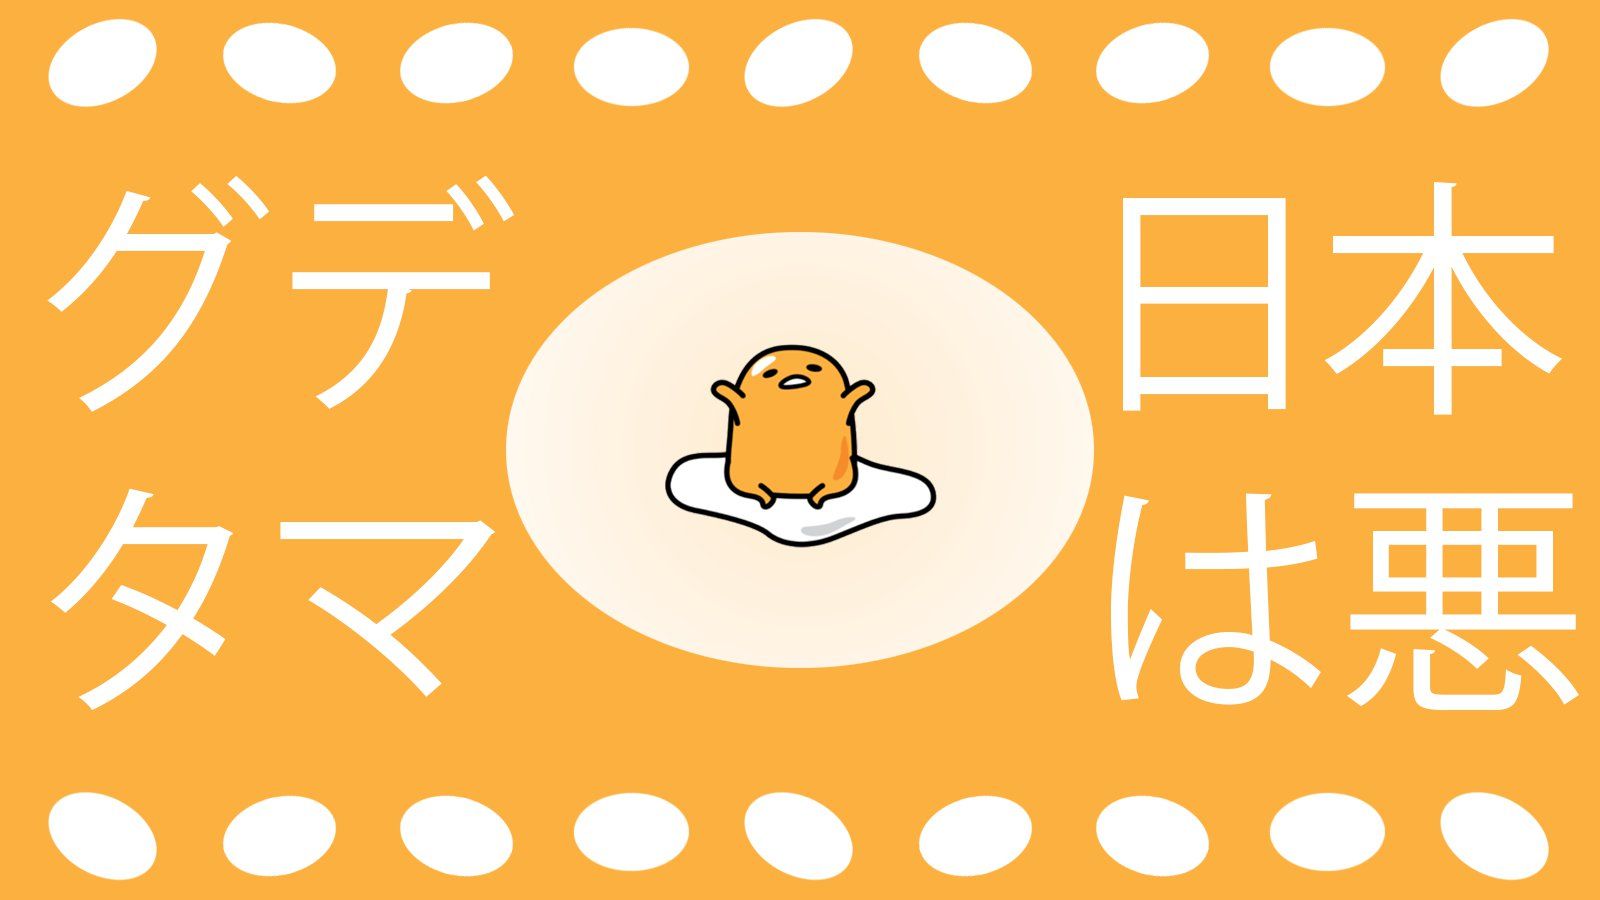 A yellow background with an egg and some writing - Gudetama